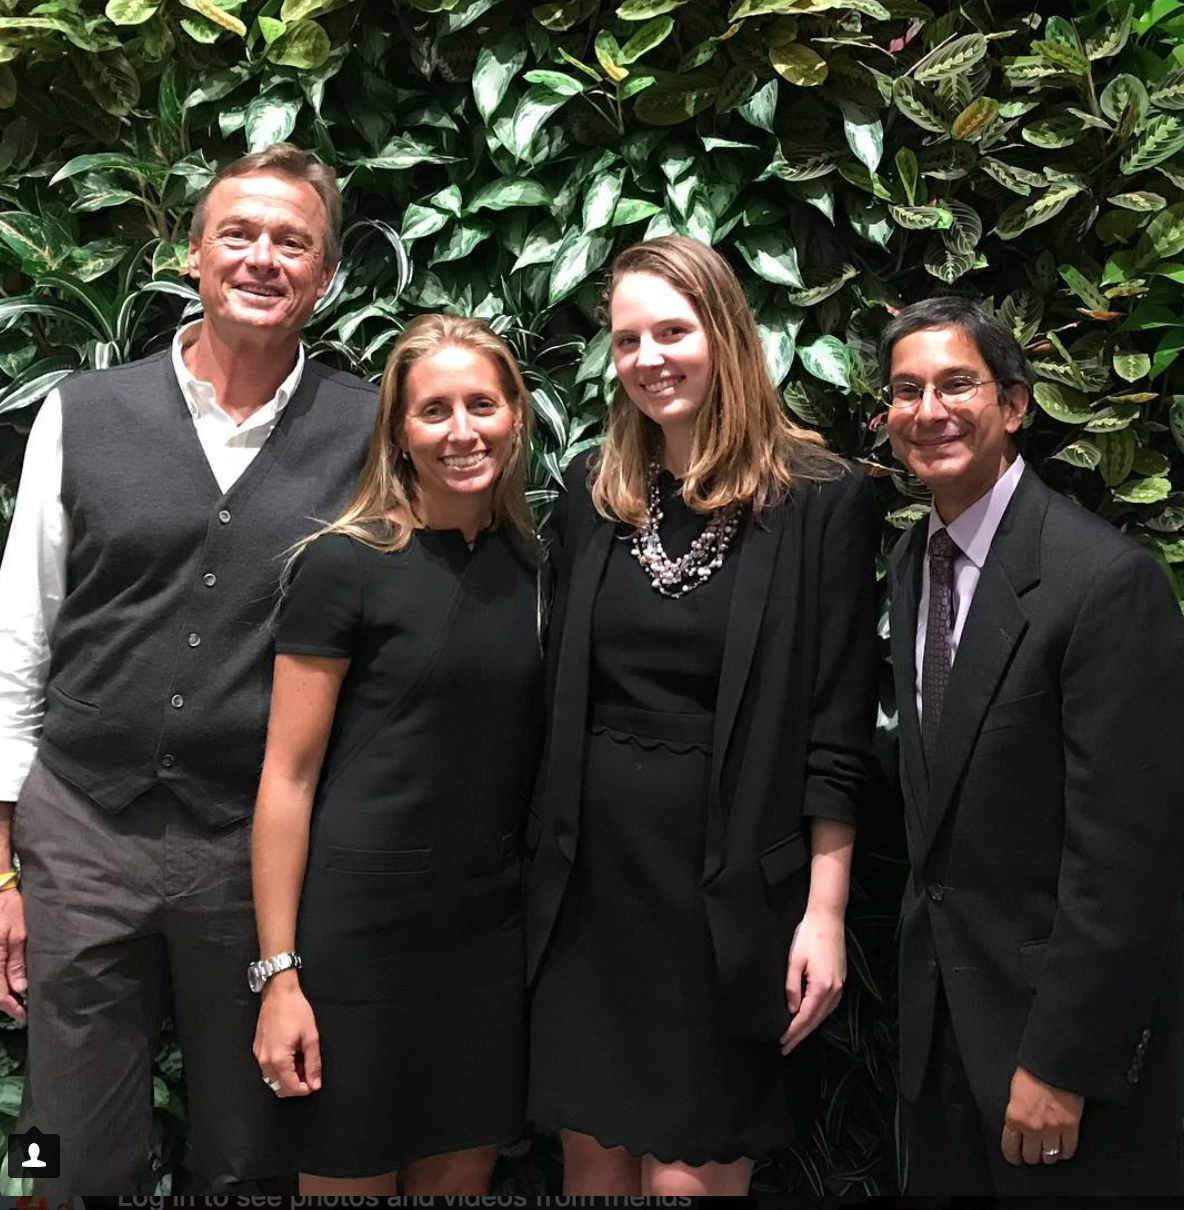 L to R: Dr. Bruce Neill, Gaelin Rosenwaks, Maddie Hickey, and Nik Khakee at an Everglades Foundation event in New York.